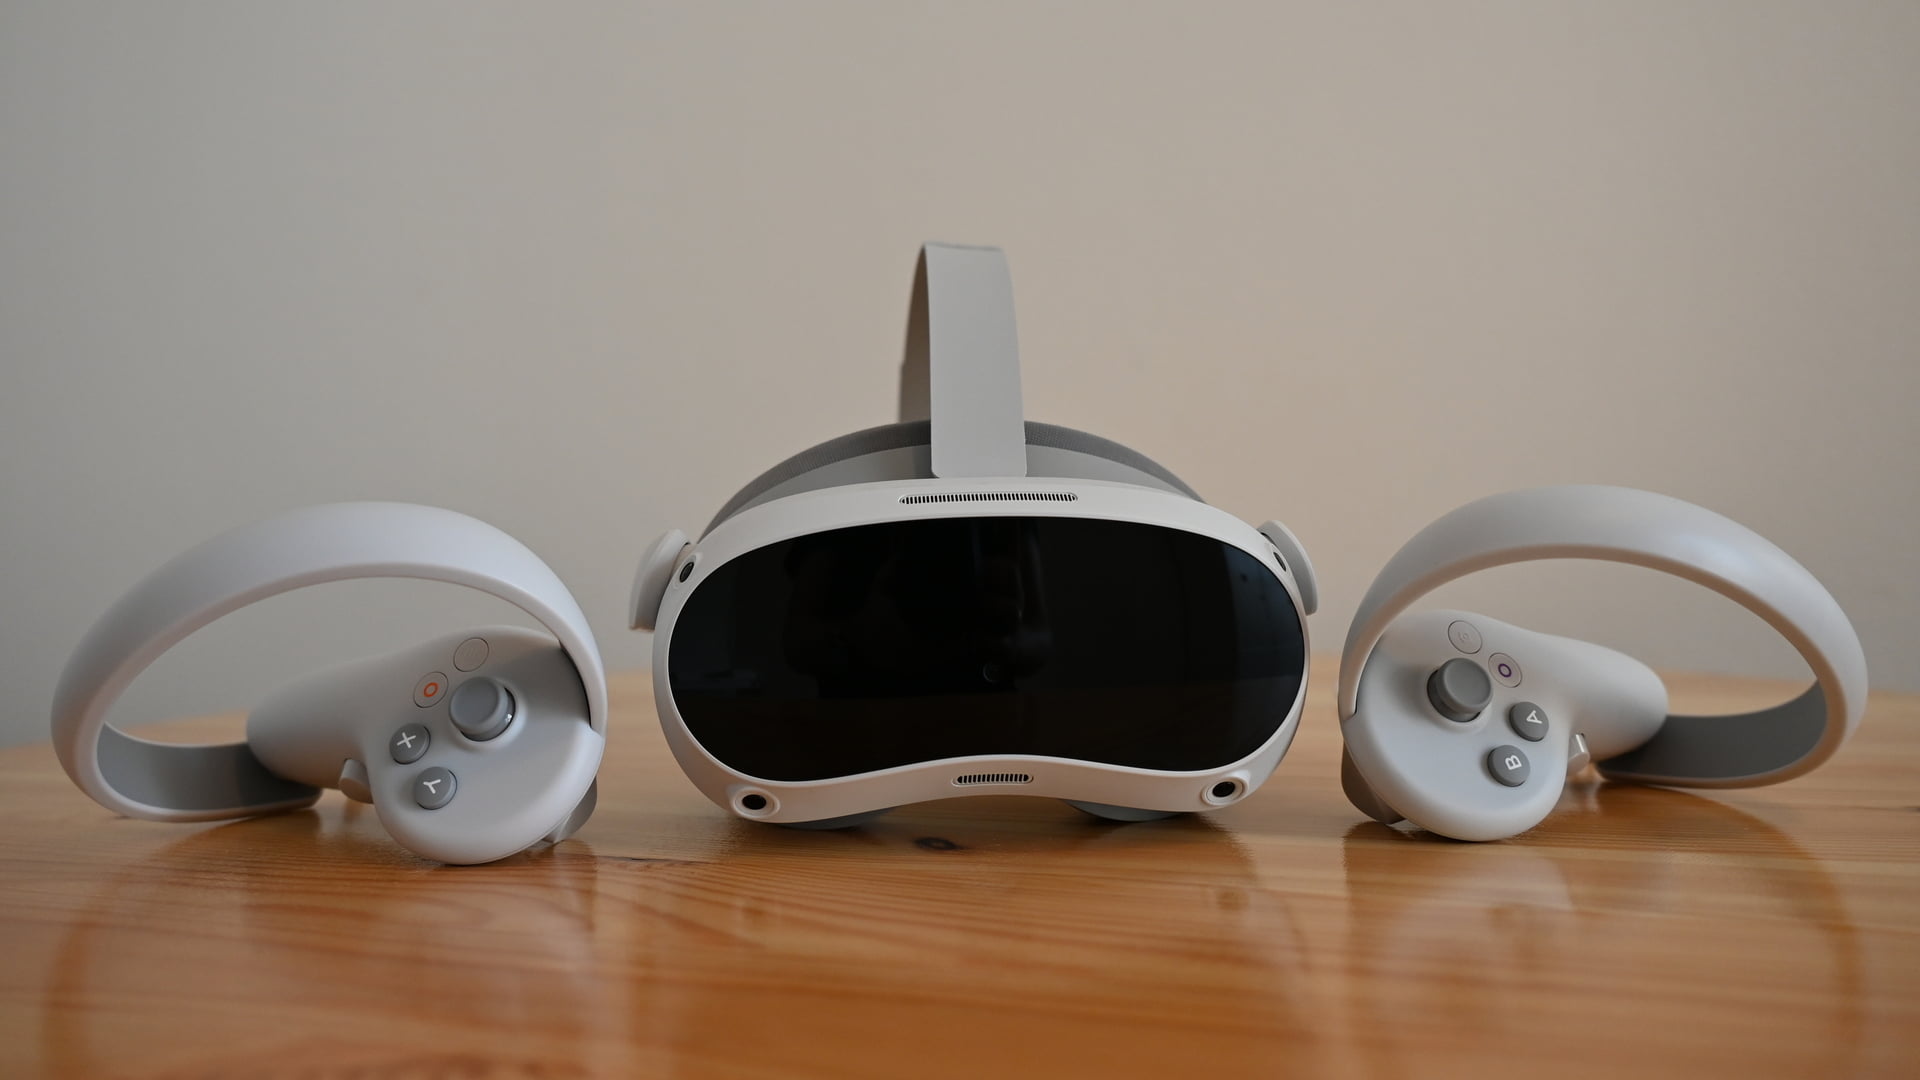 Pico 4: Bytedance sells 46,000 VR headsets in China